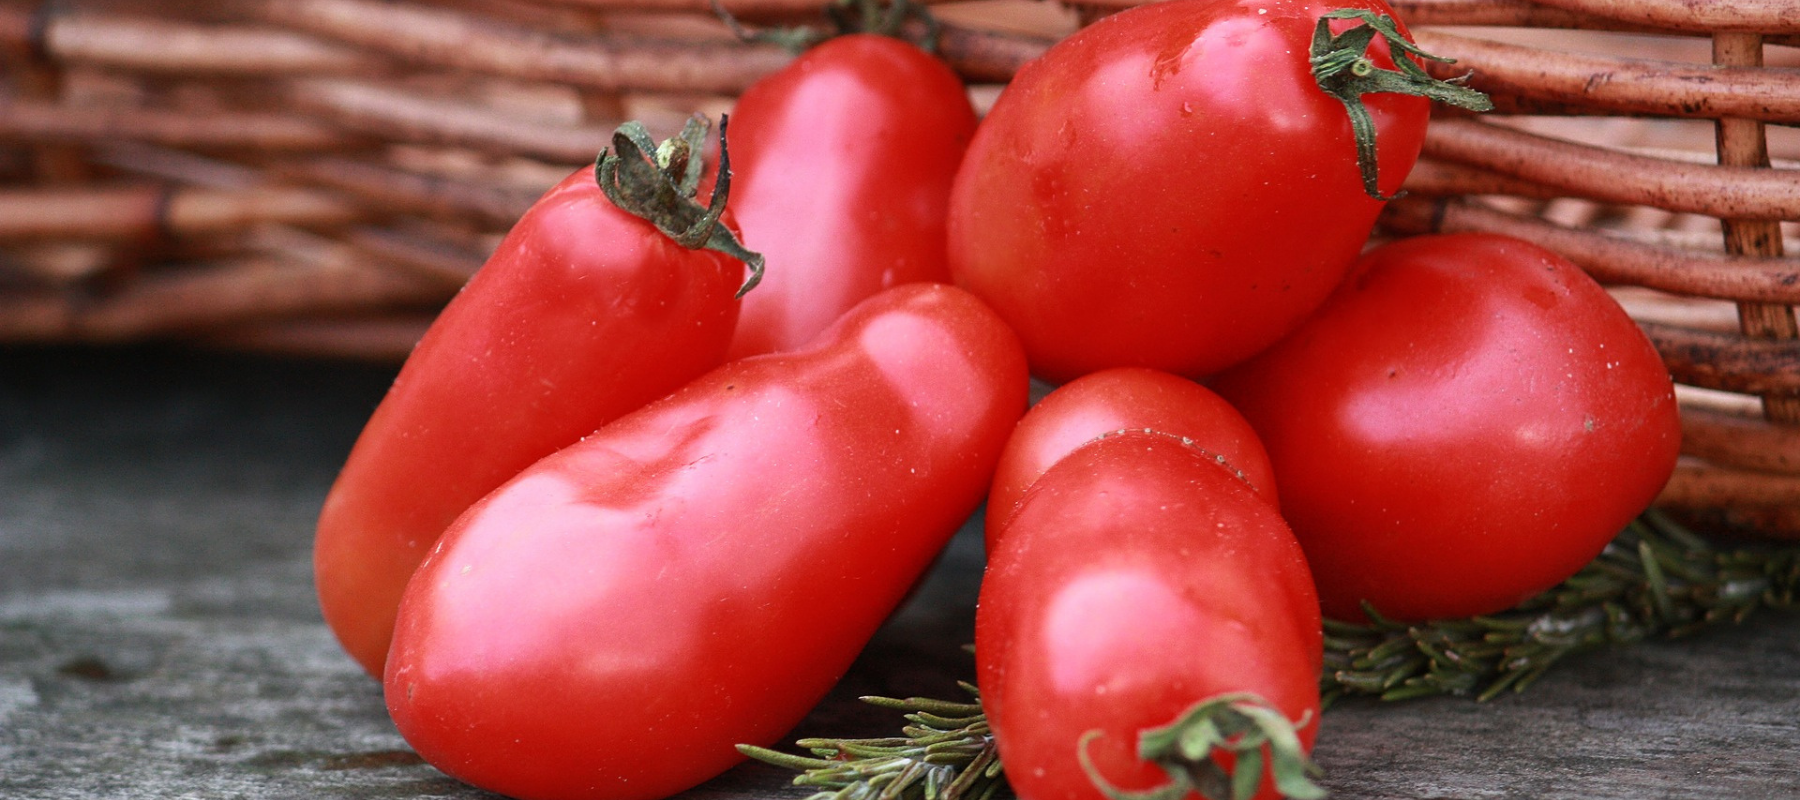 Growing tomatoes - your questions answered